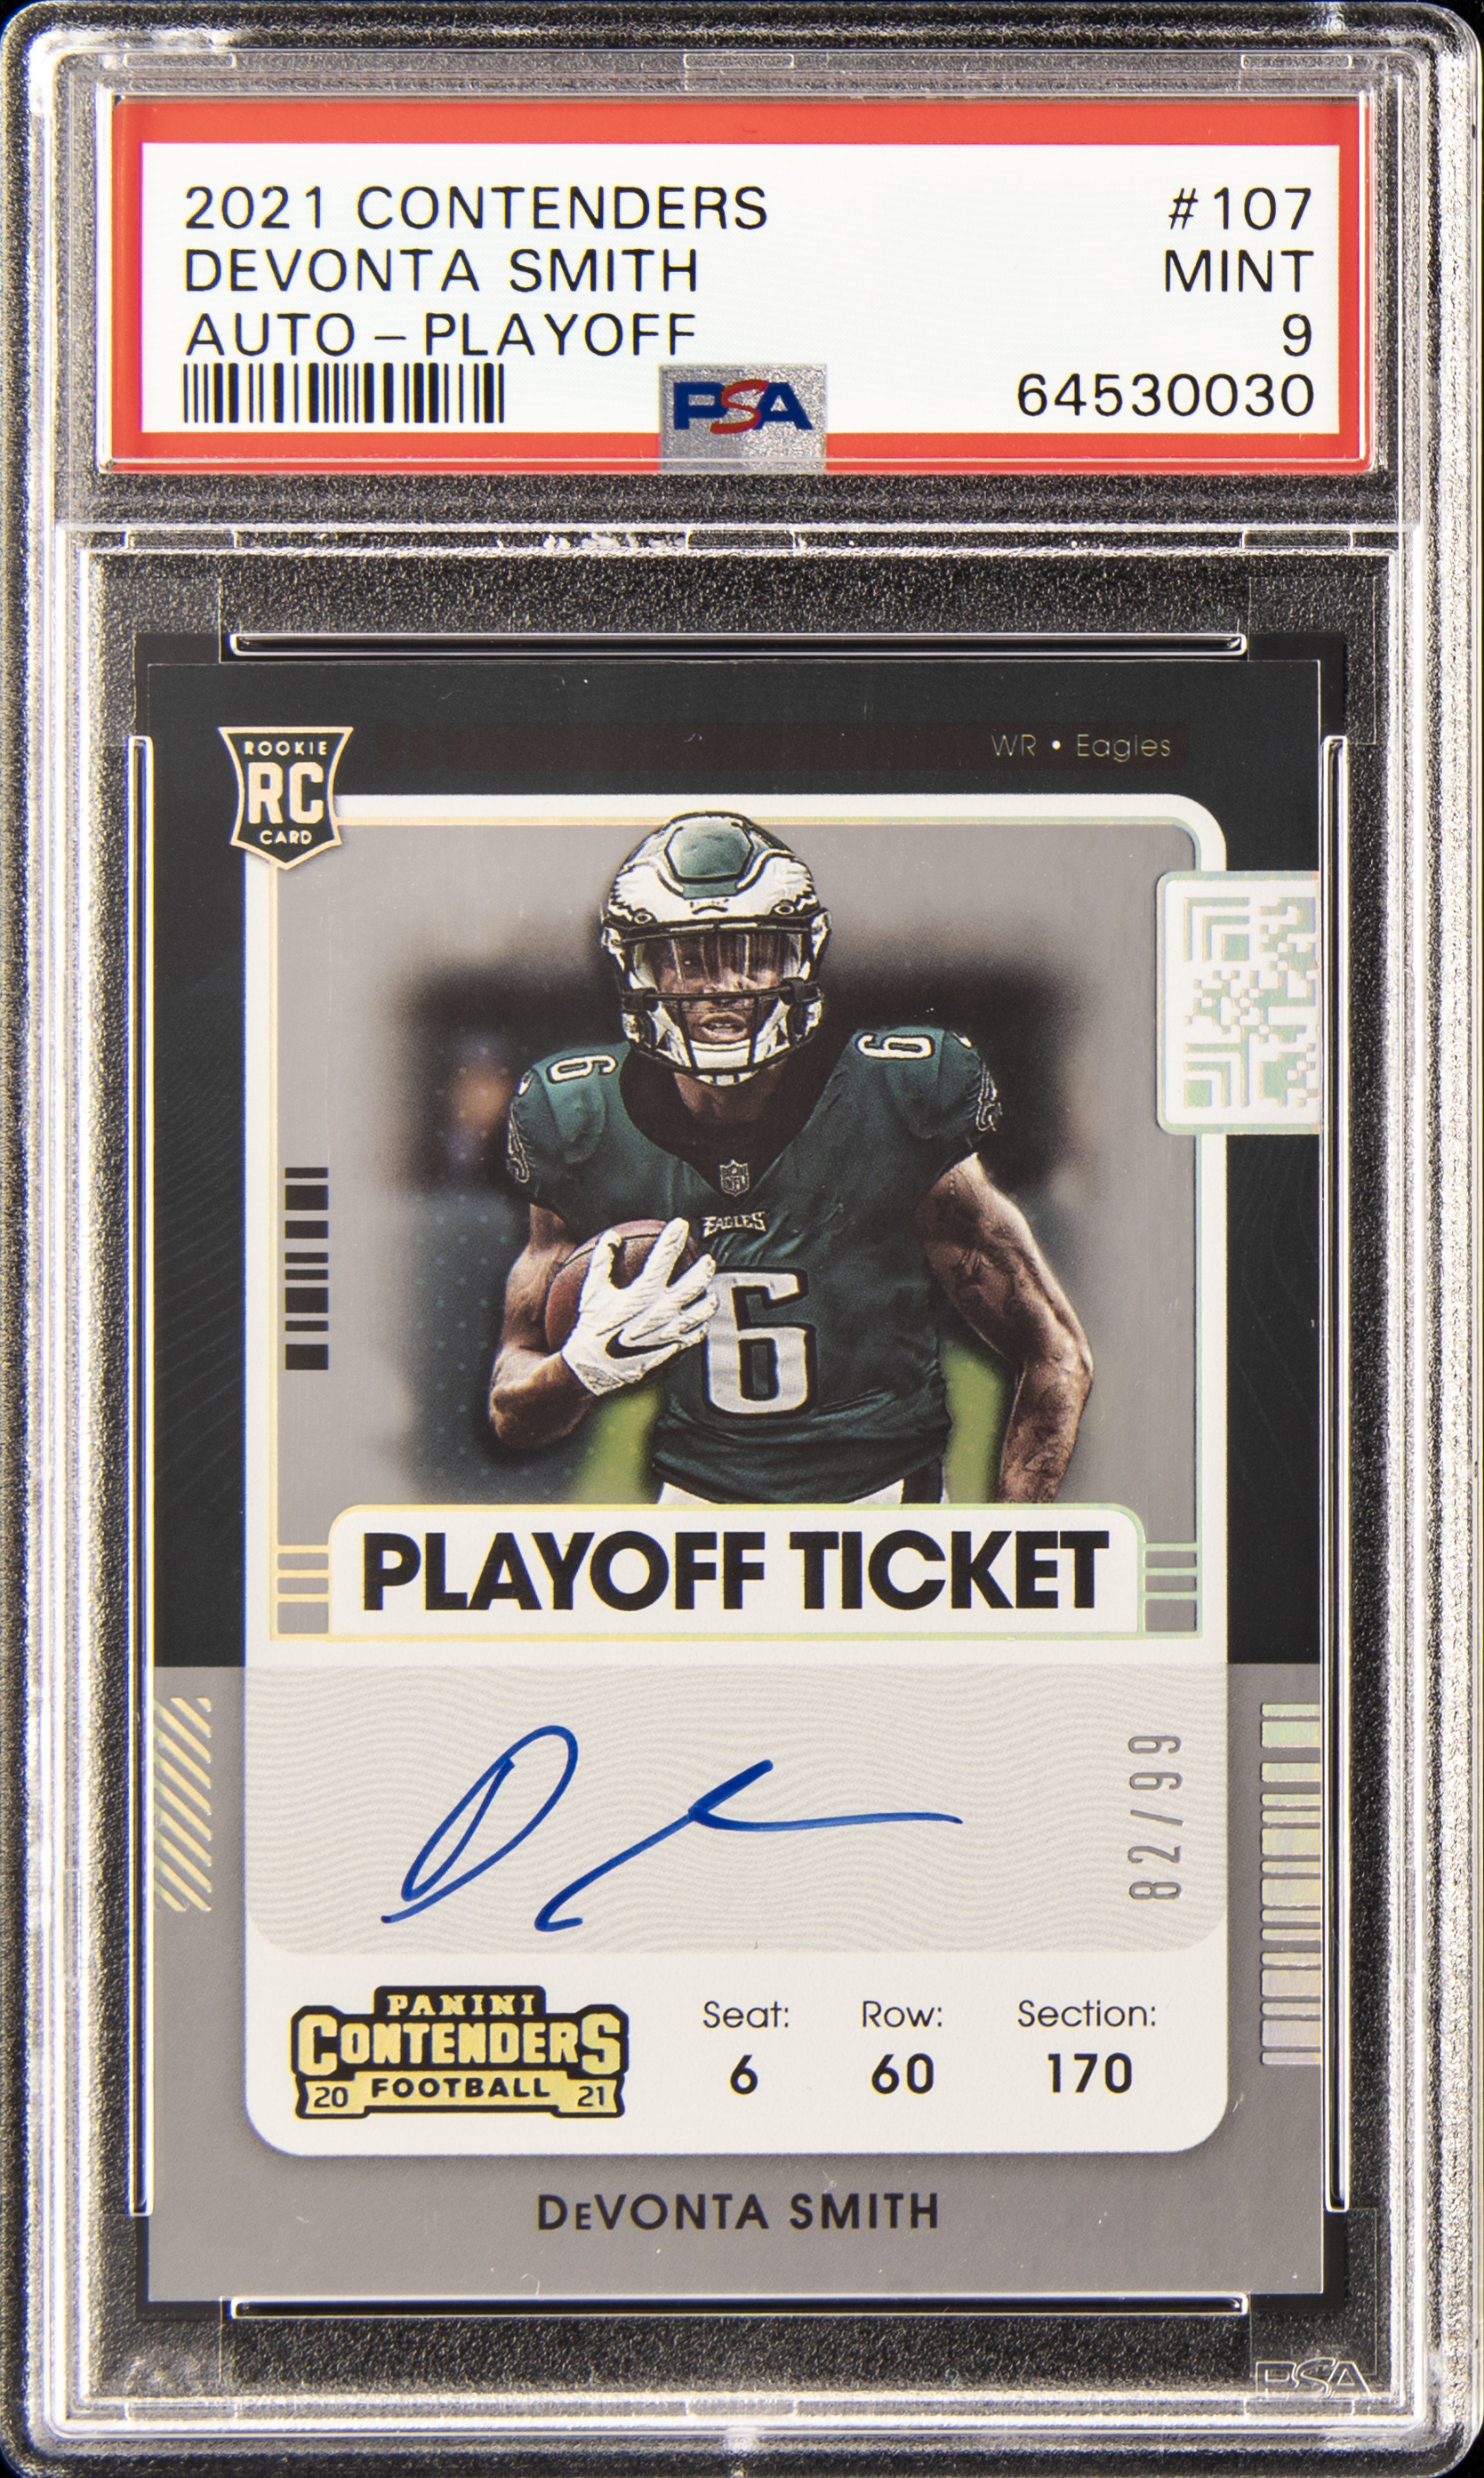 2021 Panini Contenders Playoff Ticket Autograph #107 DeVonta Smith Signed Rookie Card (#82/99) – PSA MINT 9